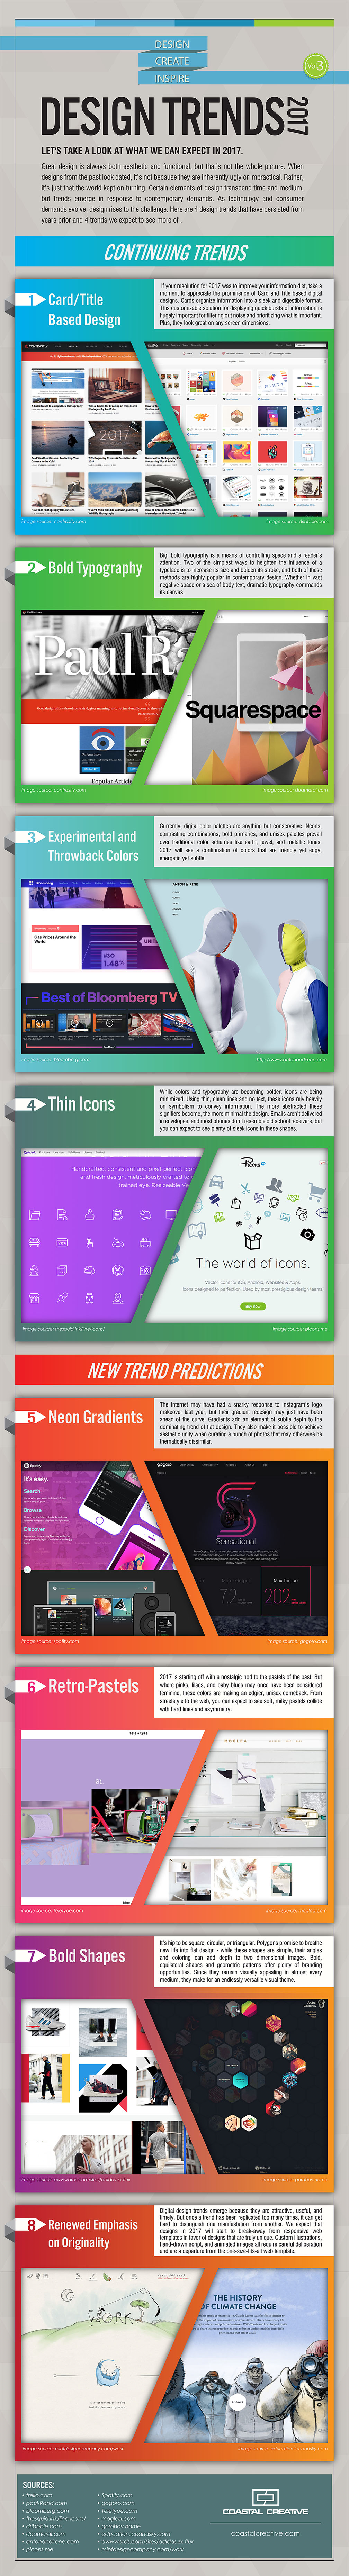 Latest Trends Of Digital Designing (2017) - Infographic